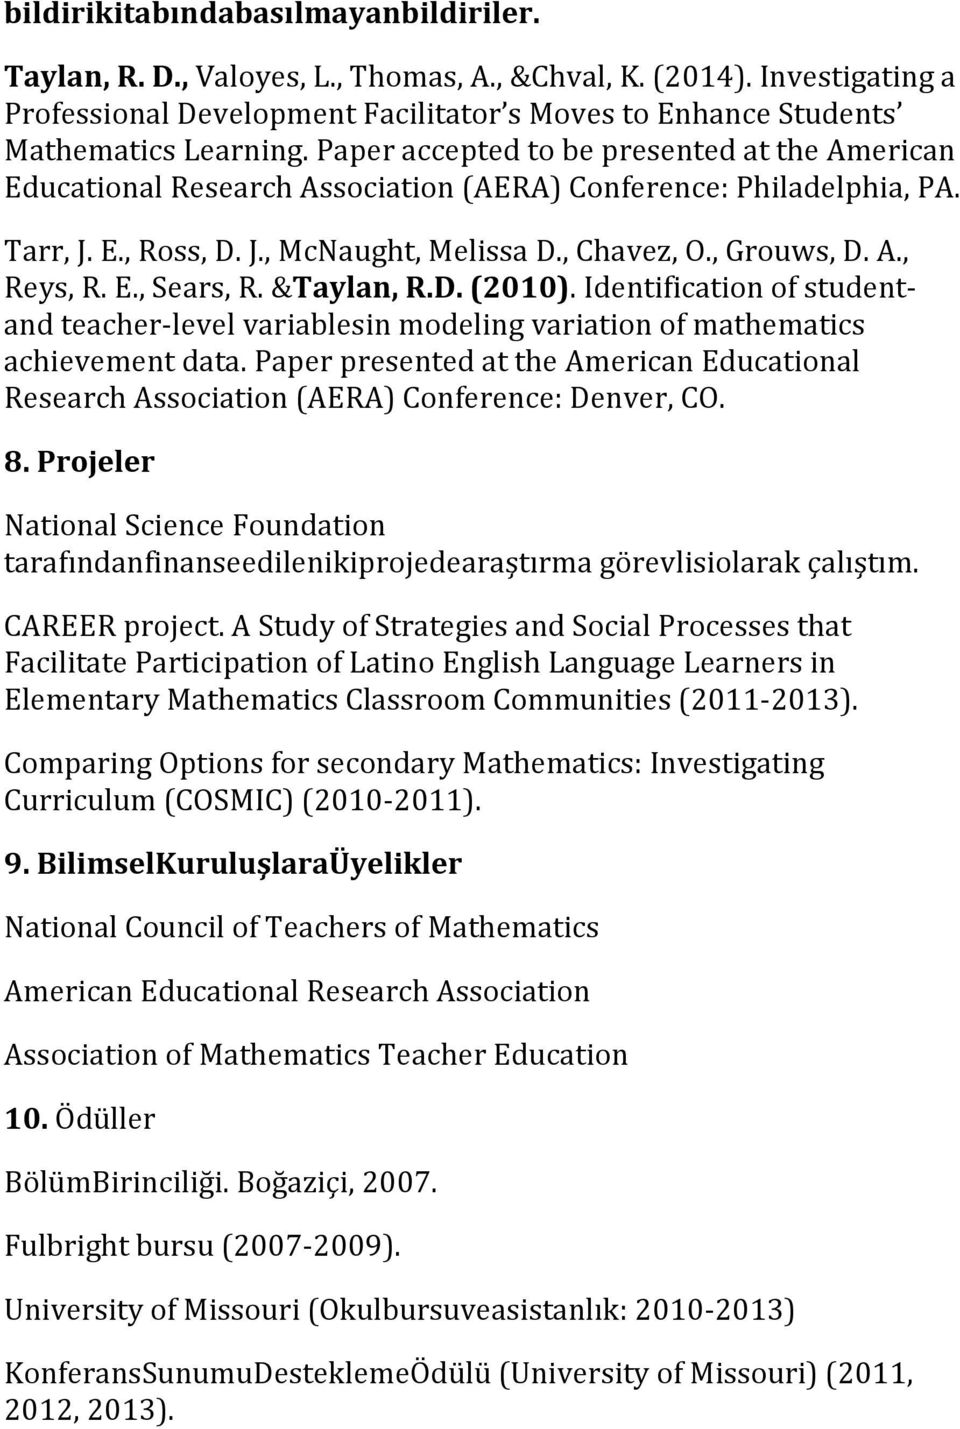 E., Sears, R. &Taylan, R.D. (2010). Identification of student- and teacher- level variablesin modeling variation of mathematics achievement data.